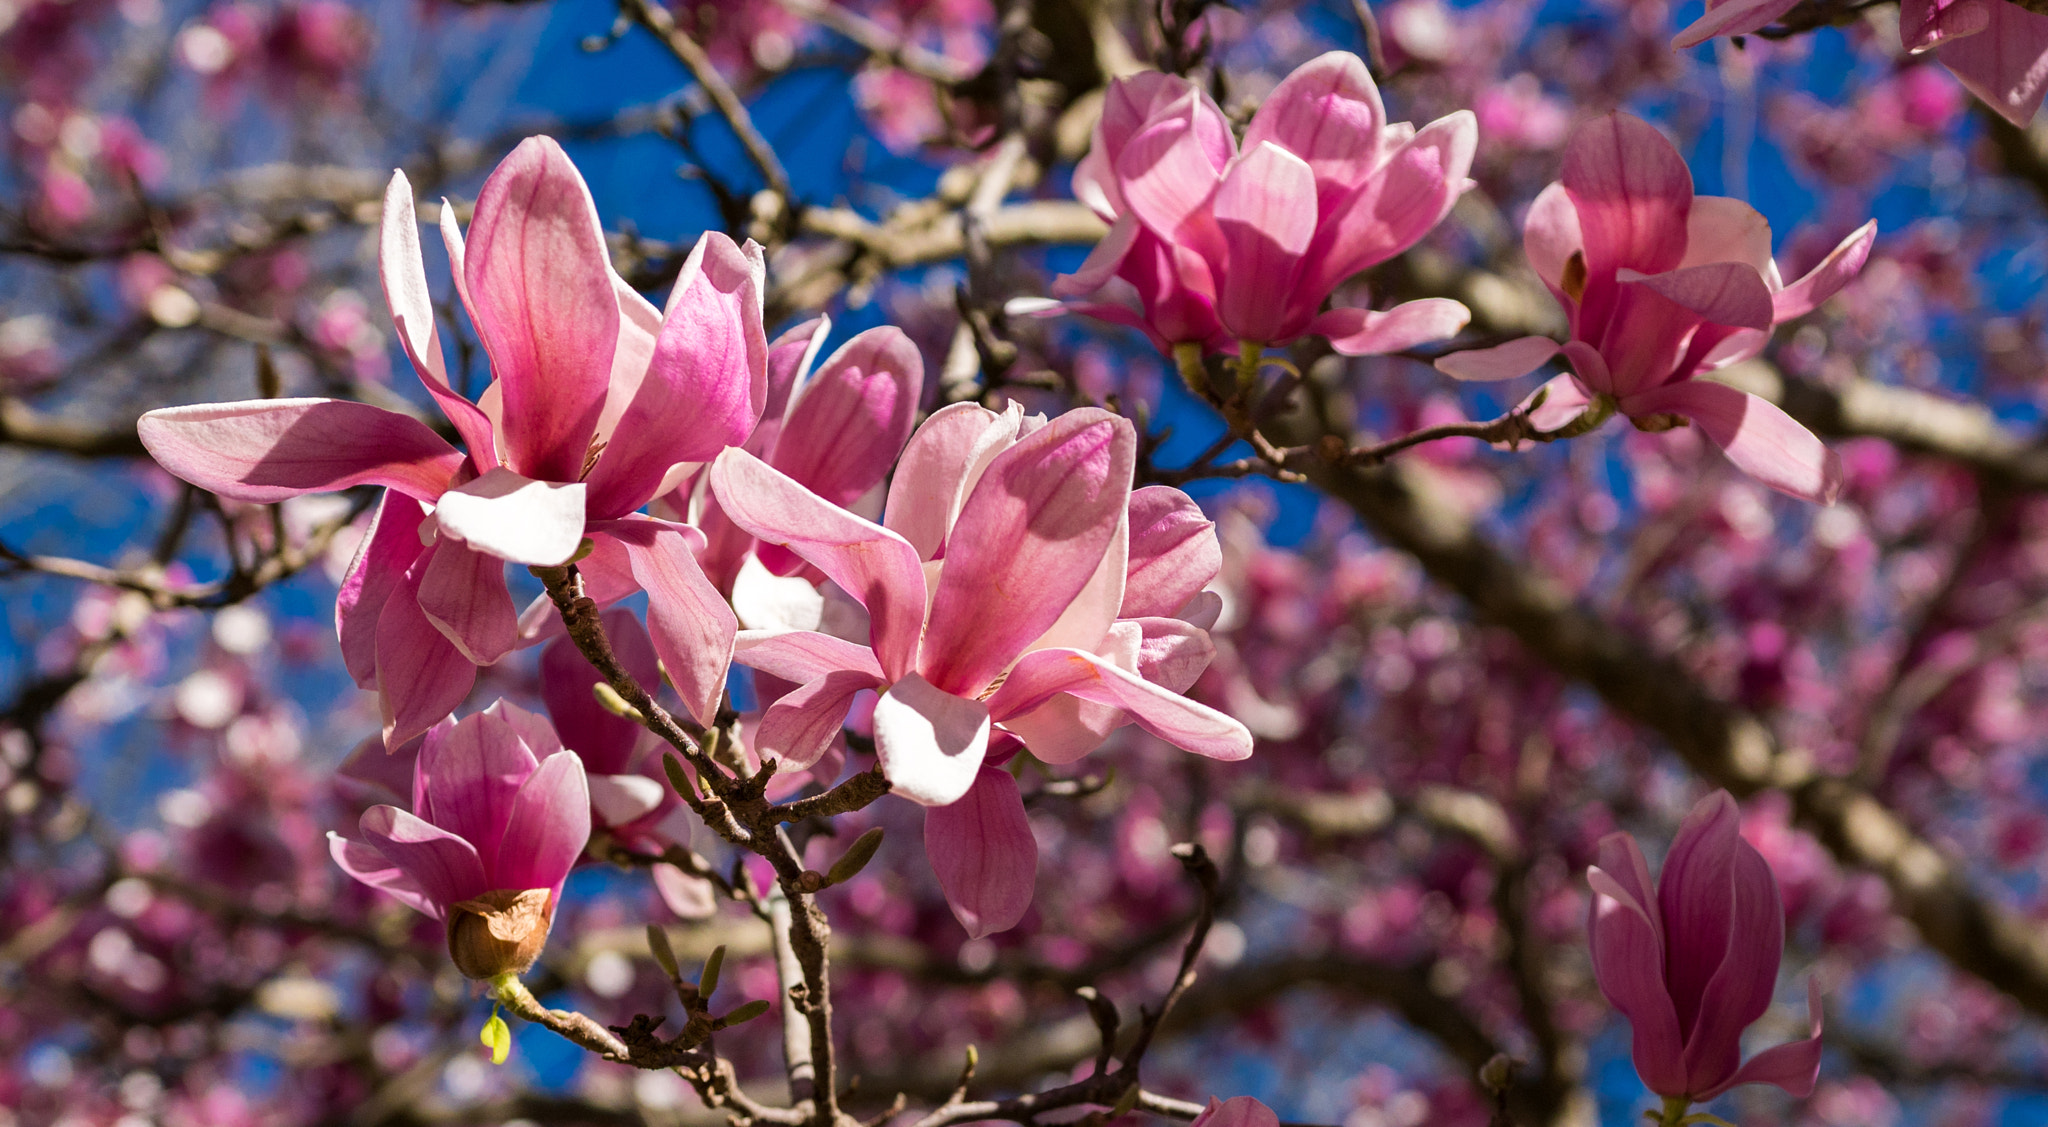 Sony a6300 sample photo. Magnolia blooms photography